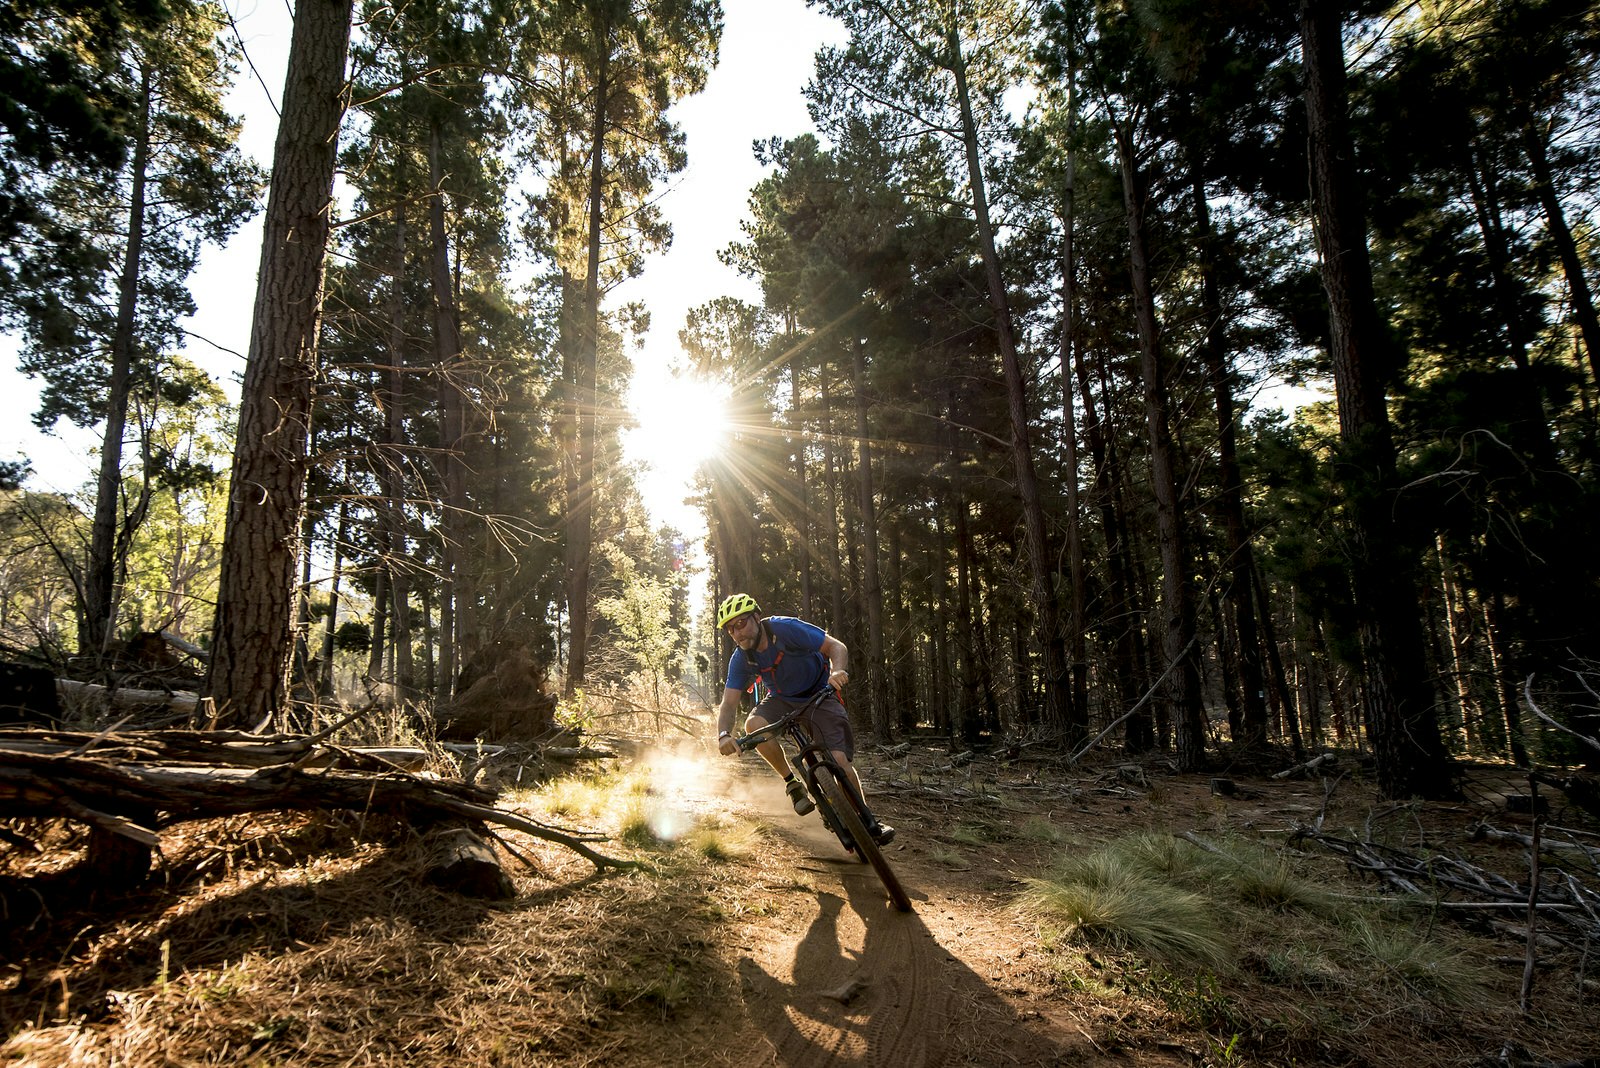 A mountain biker cycling towards the camera leans over while taking a corner on a dirt trail in a pine forest; the sun shines through the trees behind the cyclist.